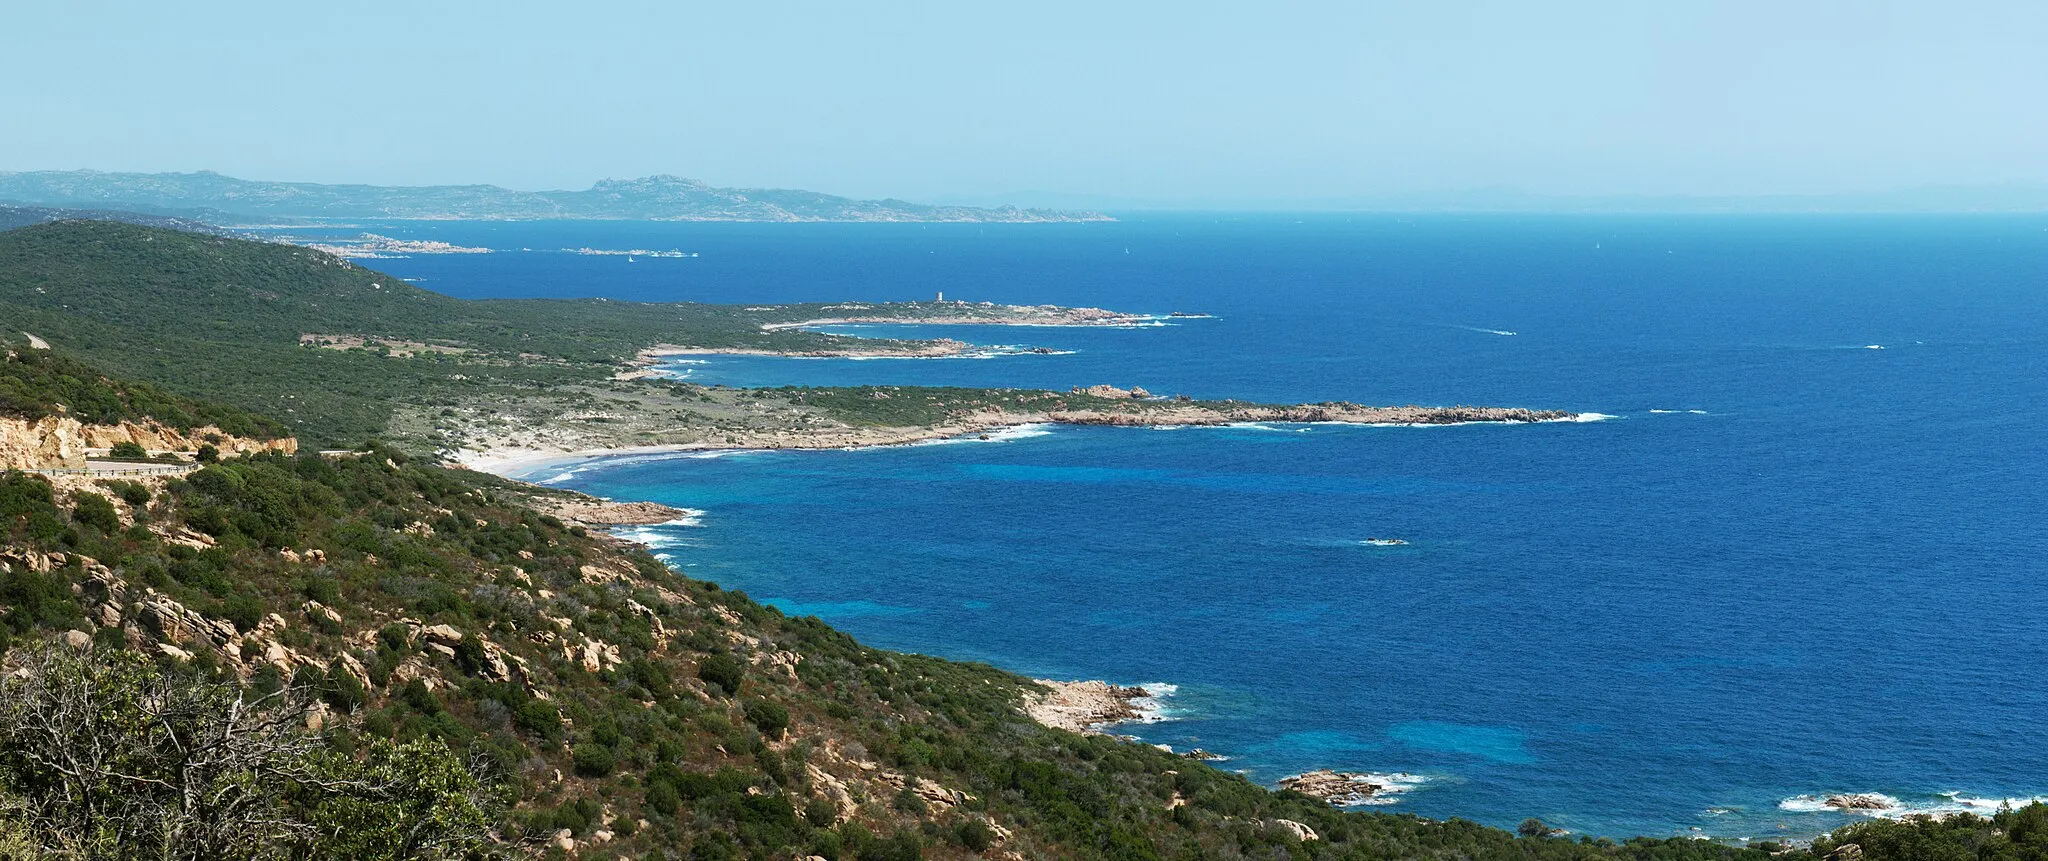 Photo showing: View of the south-western extremity of Corsica, from the N196 road near Roccapina (a place known as the "road curve to the far south").
The capes from the nearest to the farthest are:

the Punta di Mucchju Biancu, and the beach of Mucchju Biancu on the left
a nameless cape
the Punta di Caniscione, and the Olmeto genoese tower
the Bruzzi peninsula and the Bruzzi islands
the Punta di Capineru
the Punta di Ventilegne
the Capo di Feno (the largest cape, on the background) with a small lighthouse There is a monastery in the highest point of the Capo di Feno: the Ermitage de la Trinité.

Northern Sardinia is also barely visible, 50km away.